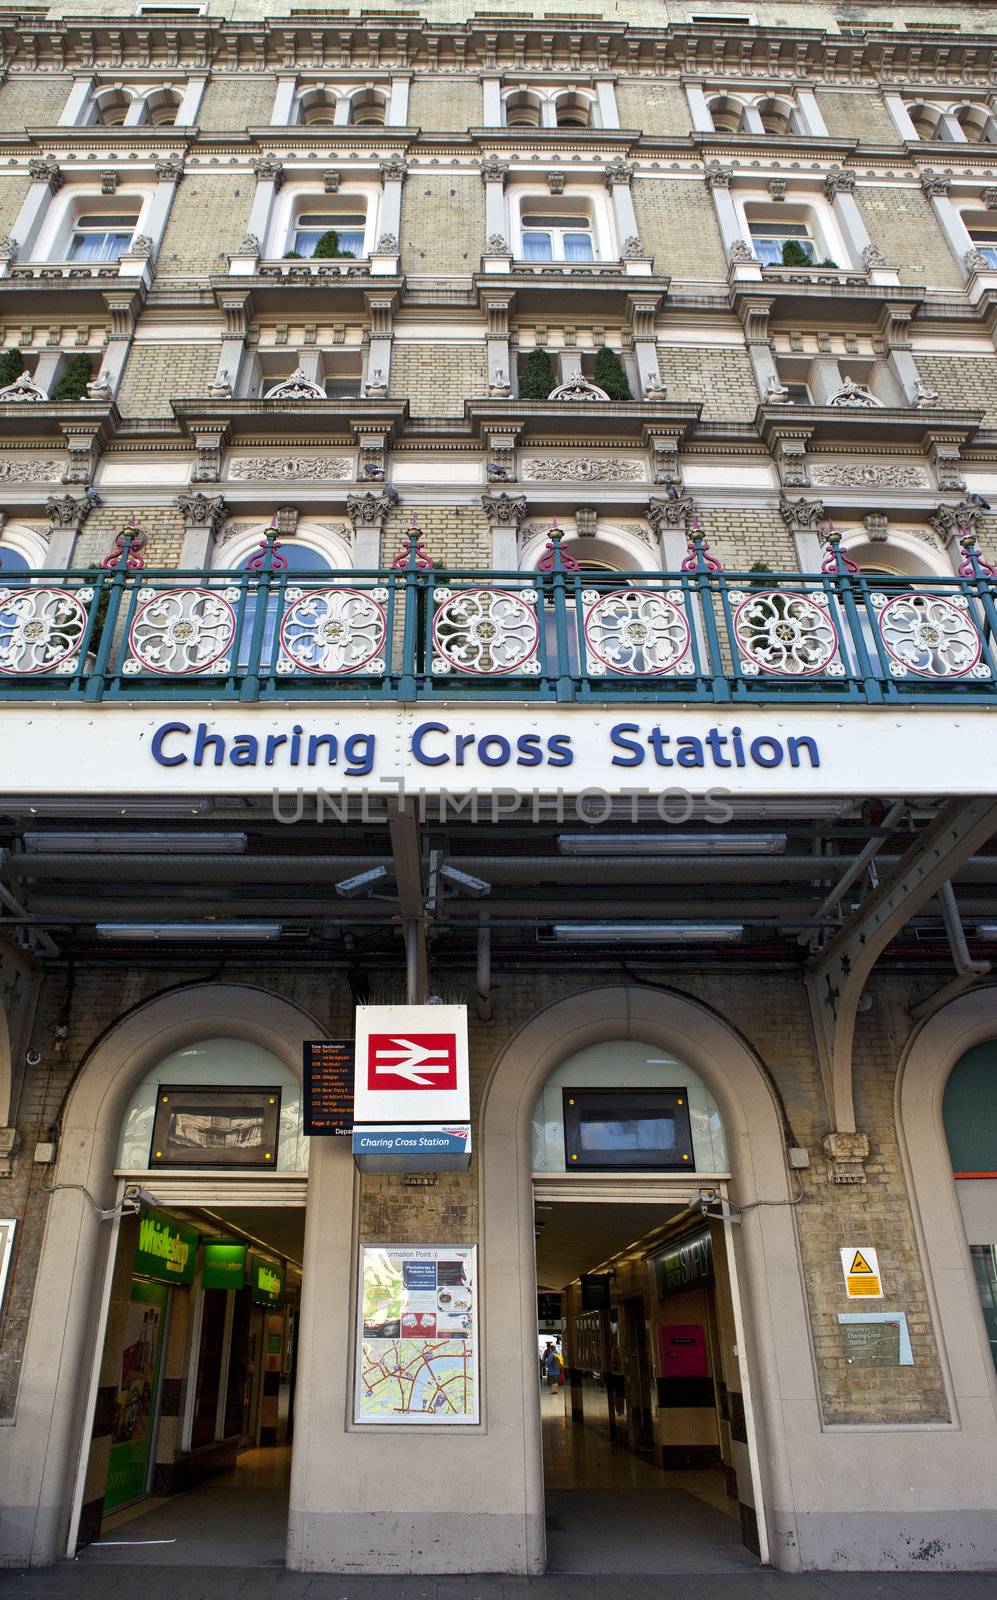 Charing Cross Station Entrance in London.